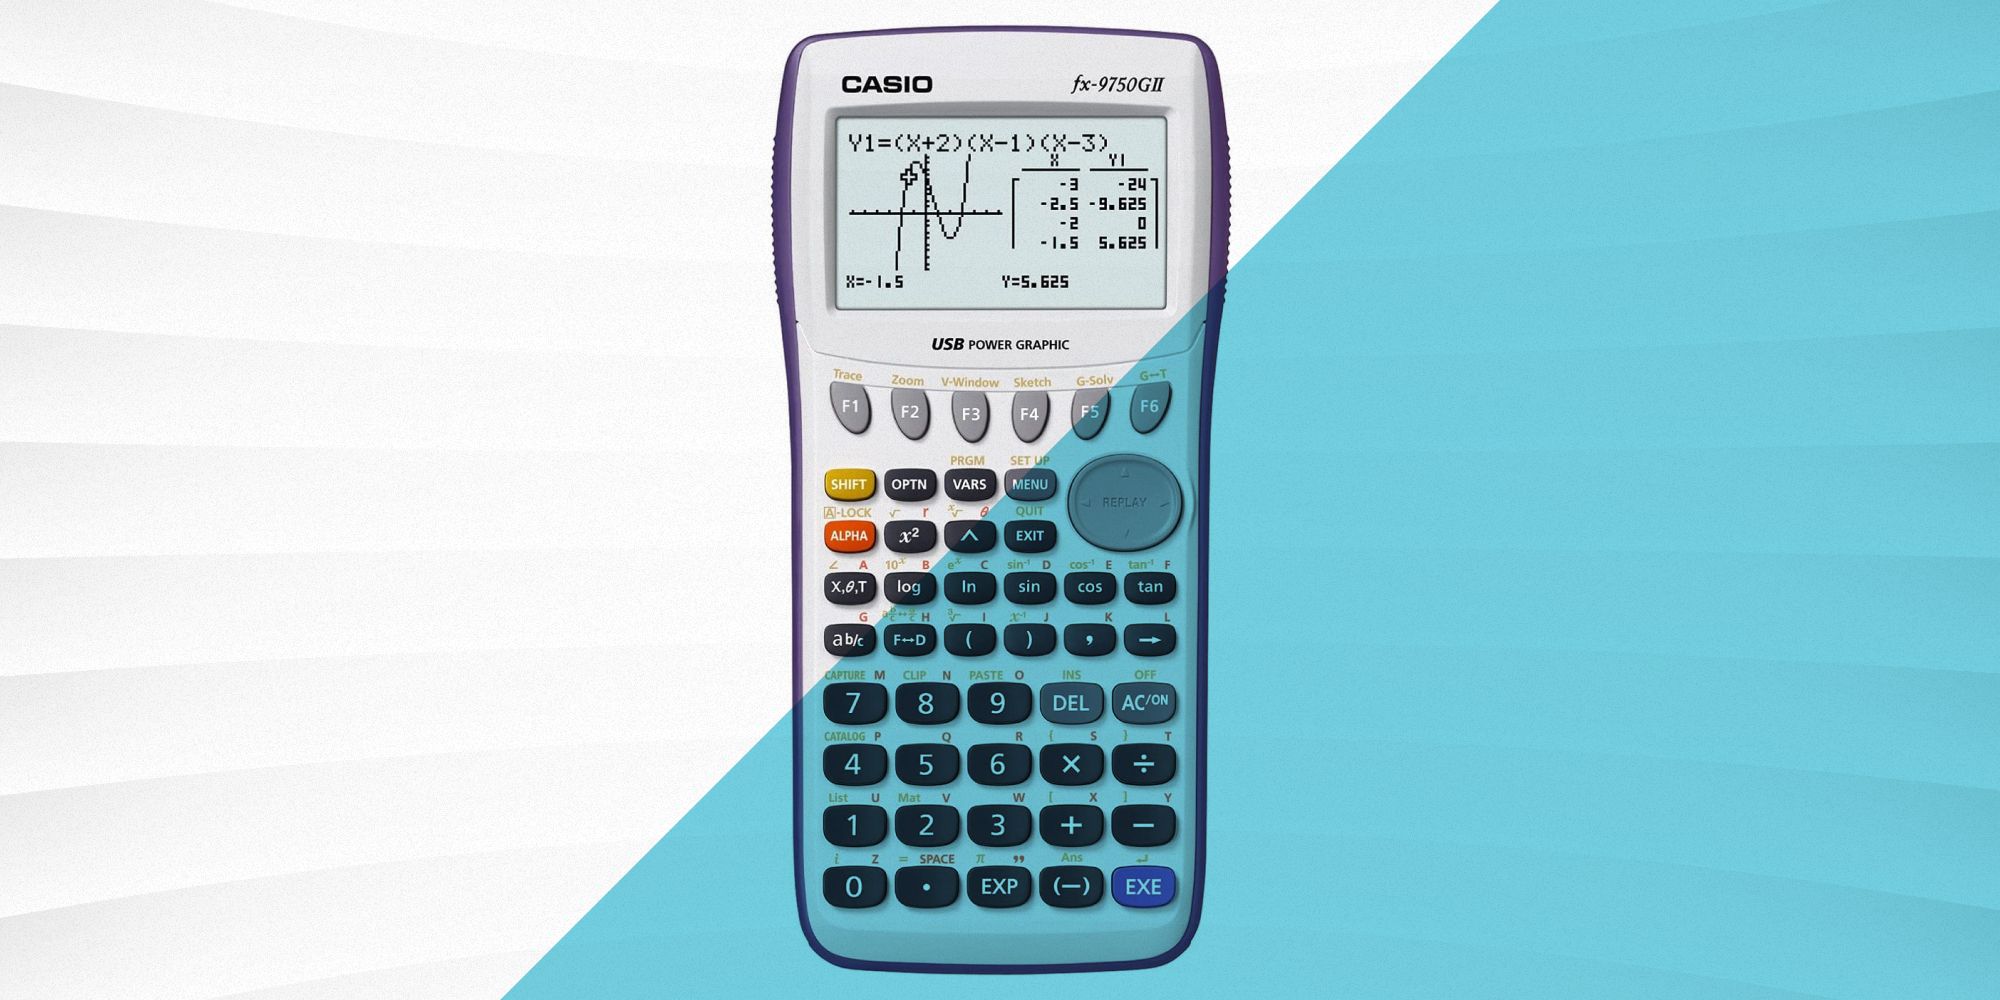 NumWorks Graphing Calculator on the App Store